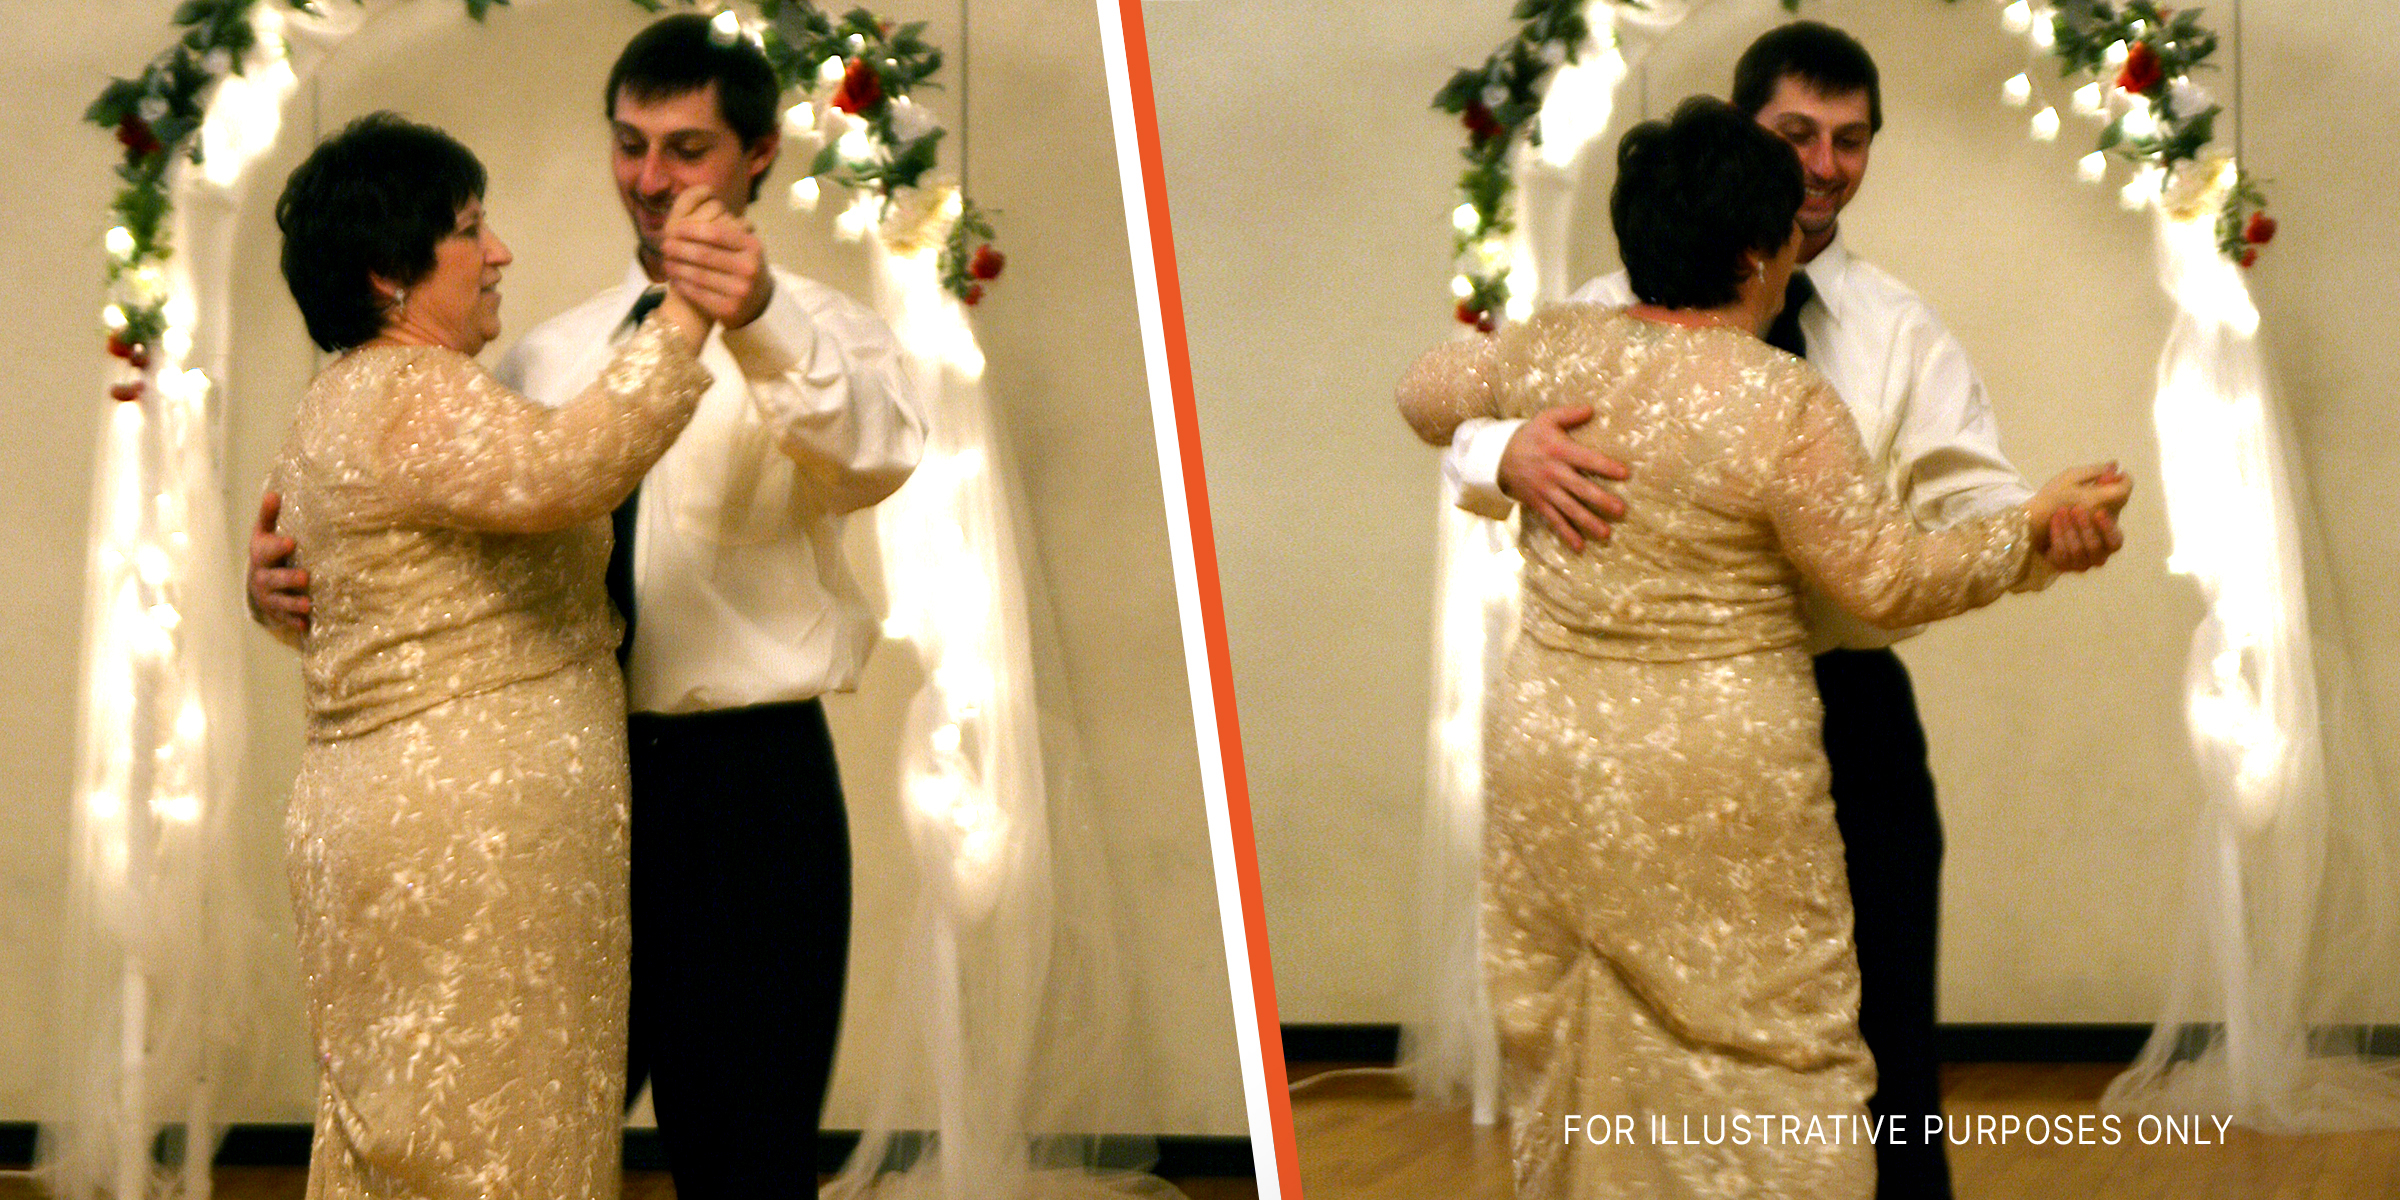 A son sharing a dance with his mother at his wedding | Source: flickr.com/quinn.anya/CC BY-SA 2.0